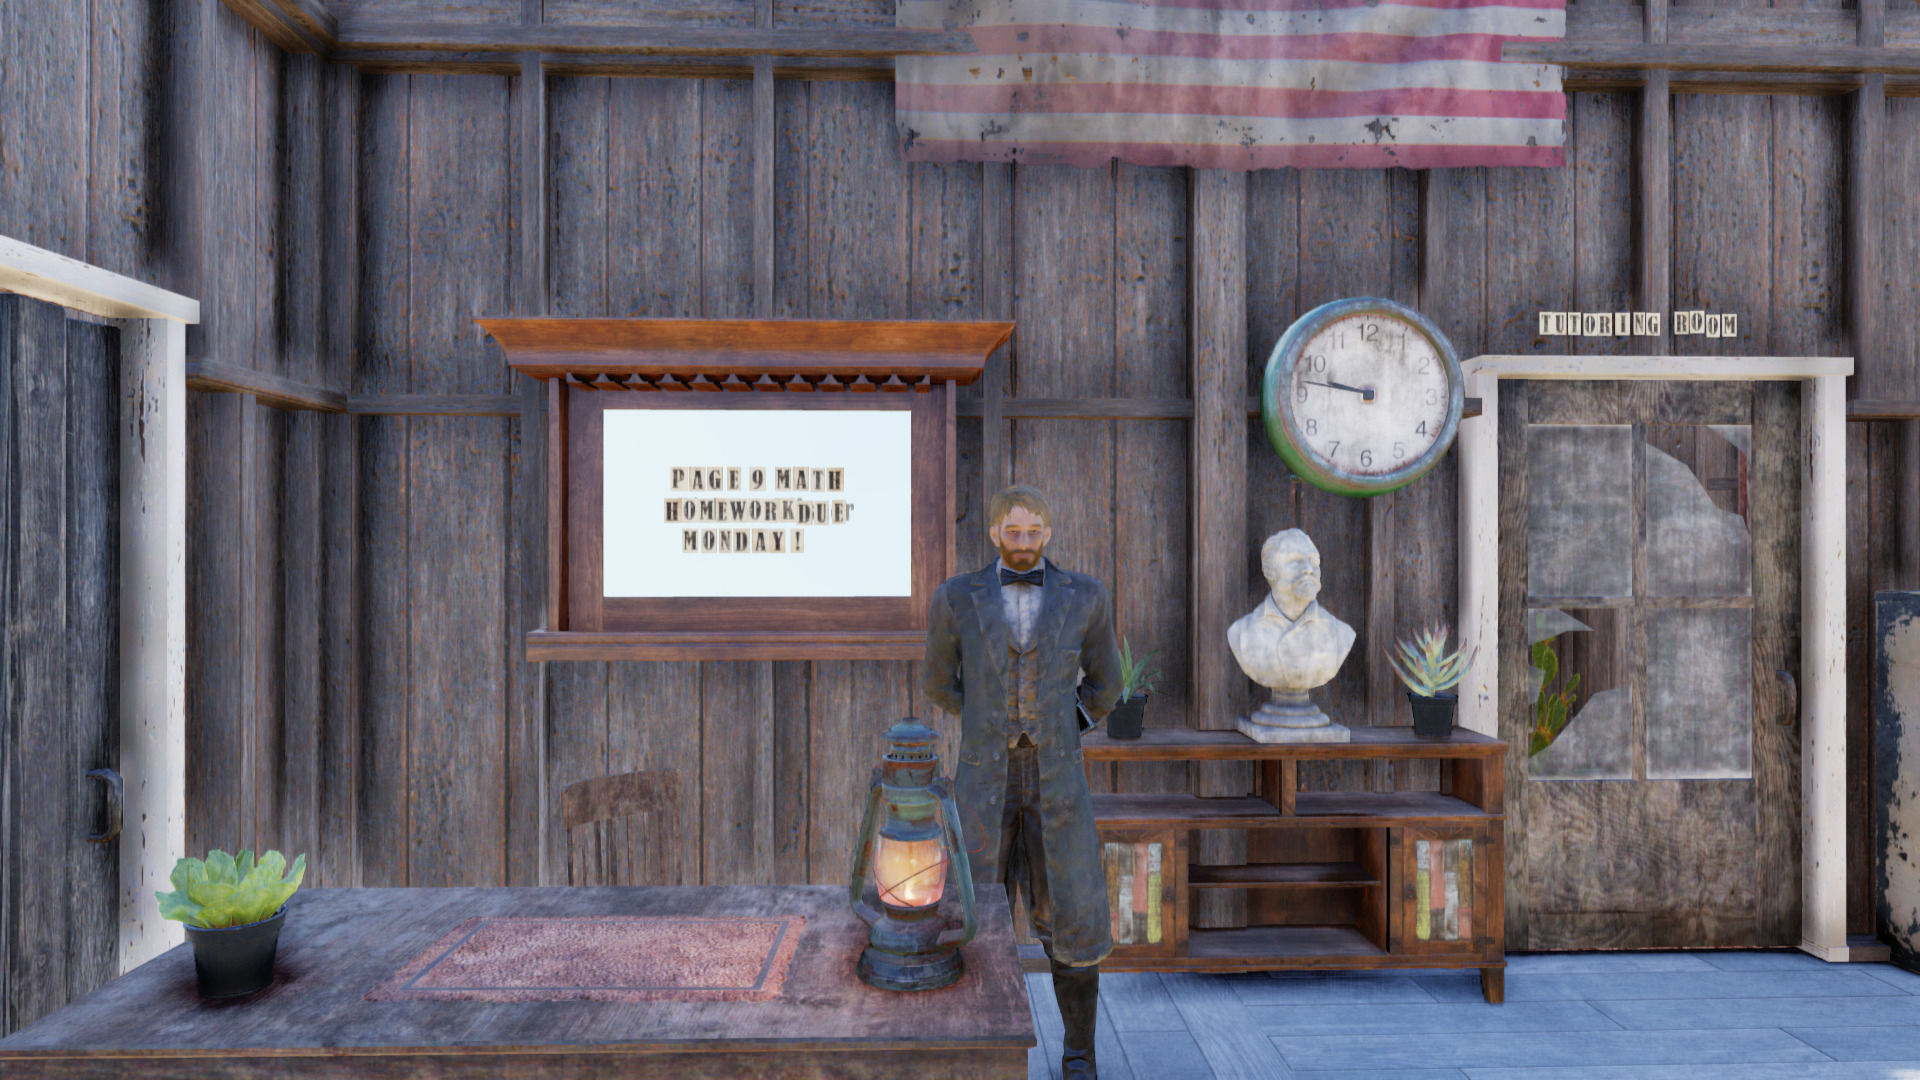 A user creates a school-trap with a riddle mathematician in Fallout 76